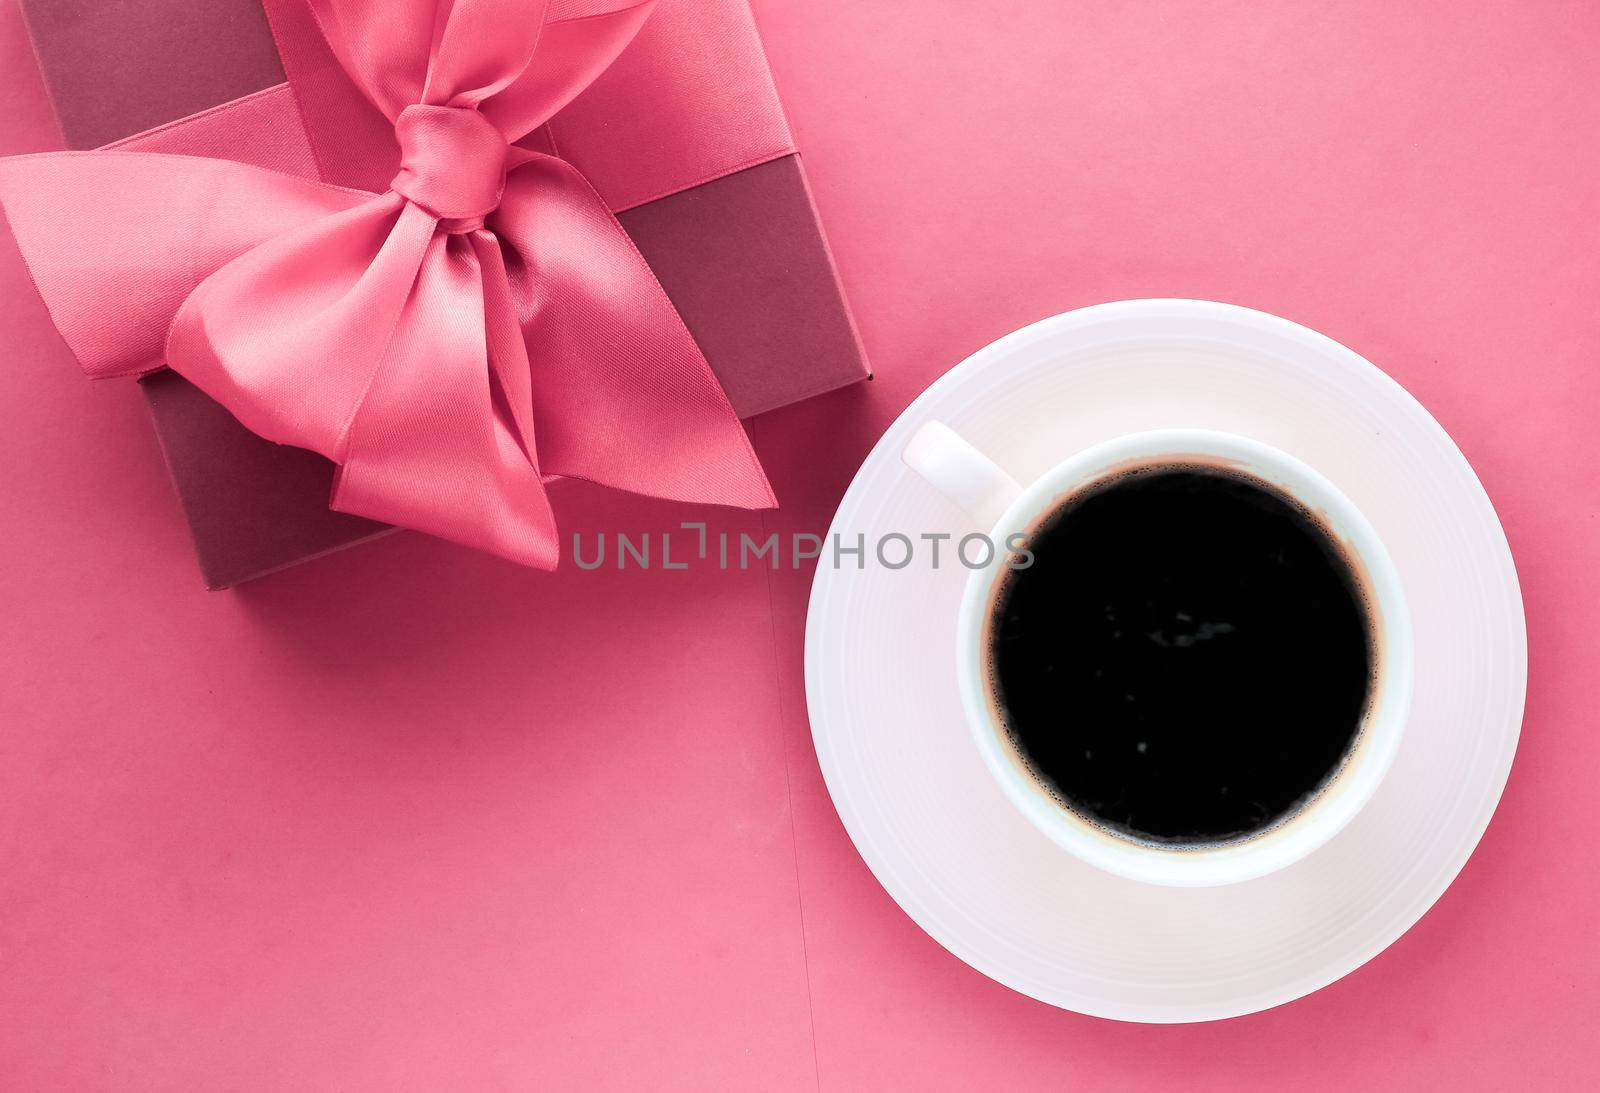 French chic, Valentines Day present and beauty drink concept - Luxury gift box and coffee cup on pink background, flatlay design for romantic holiday morning surprise